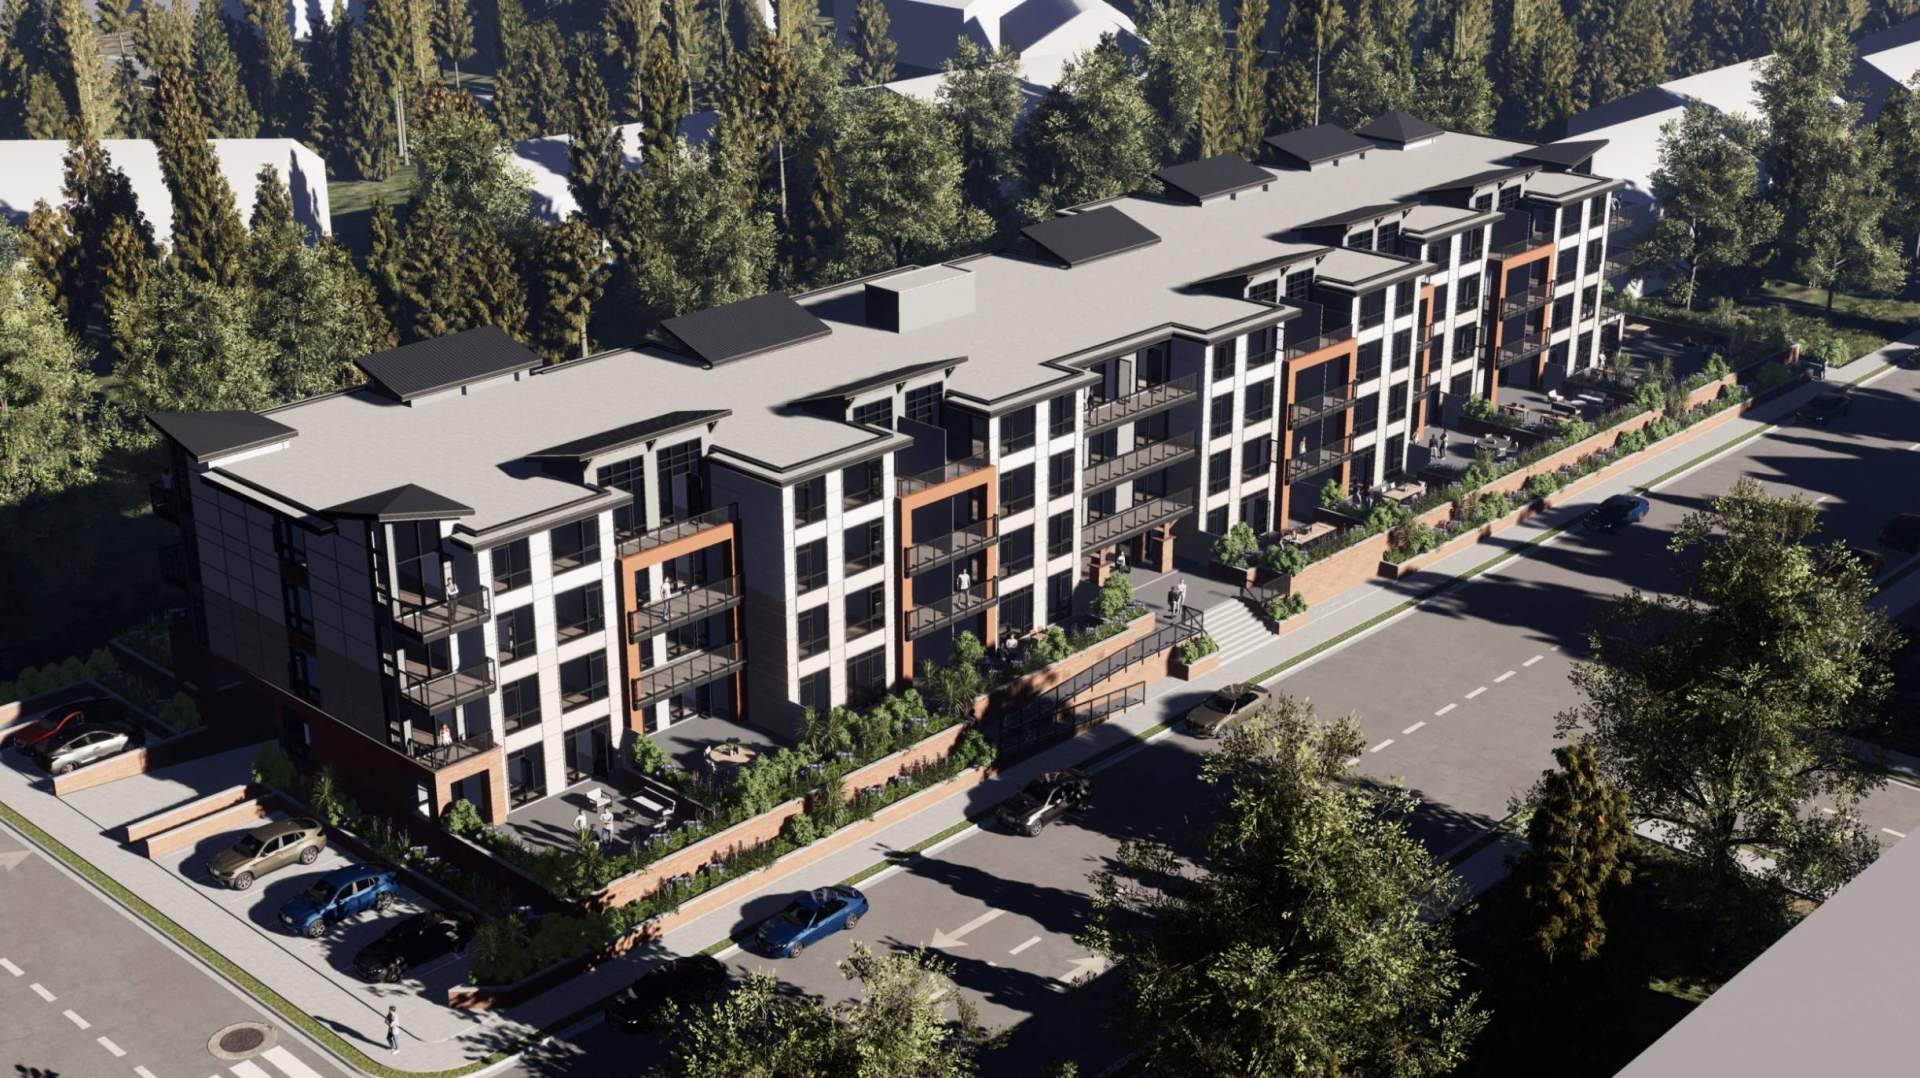 A new 4-storey residential building with a selection of 80 Langley condominiums.